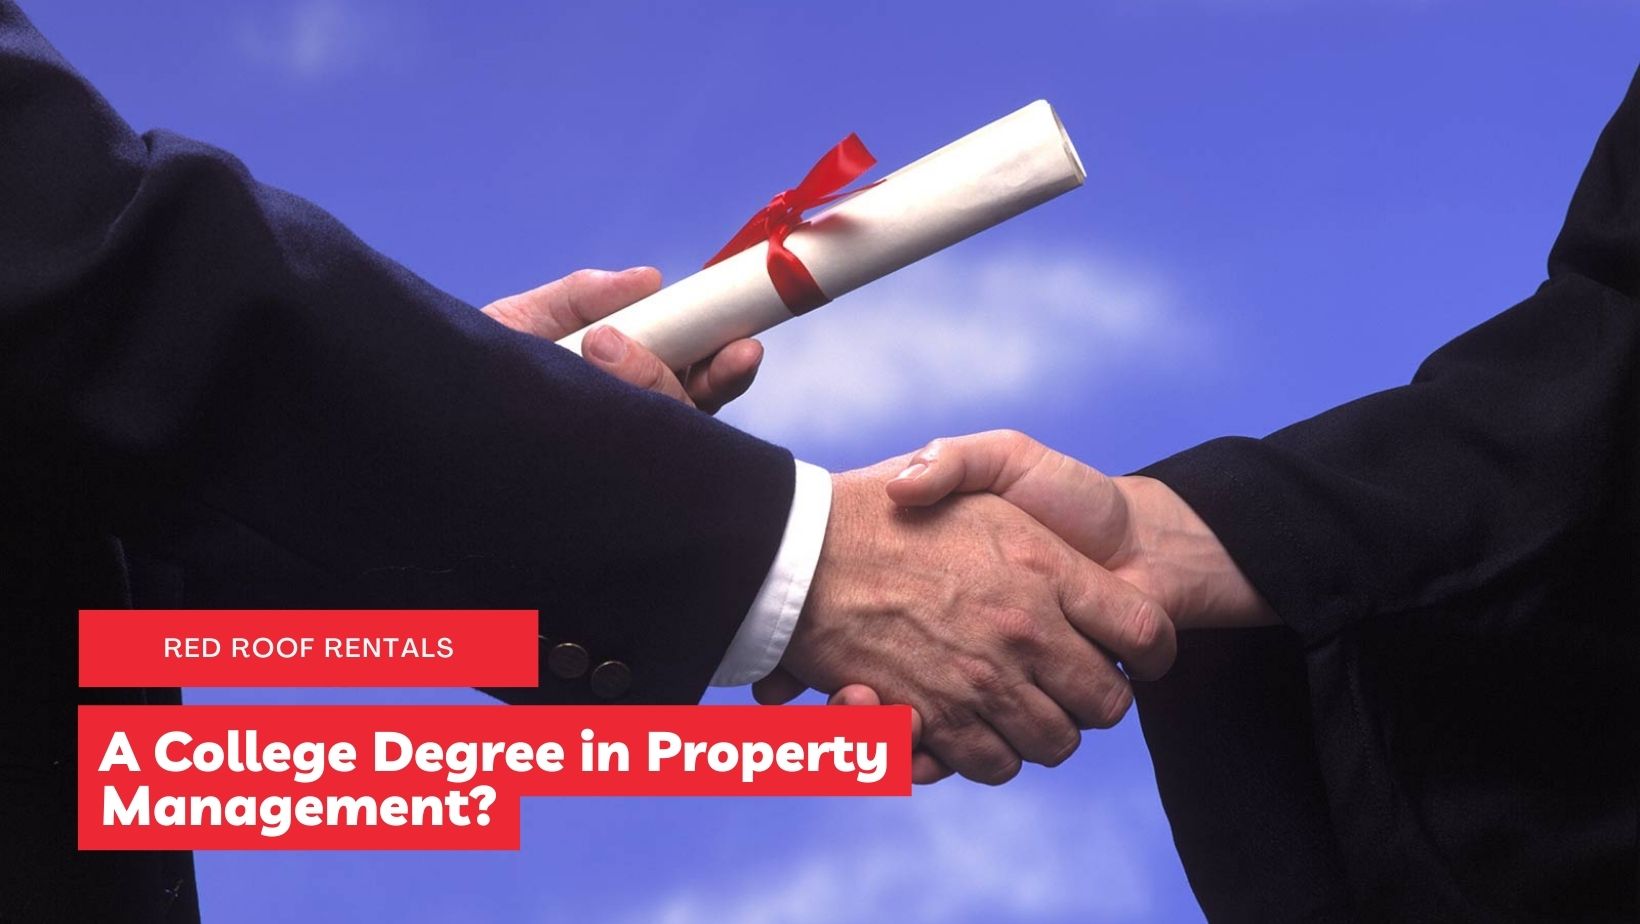 A College Degree in Property Management?